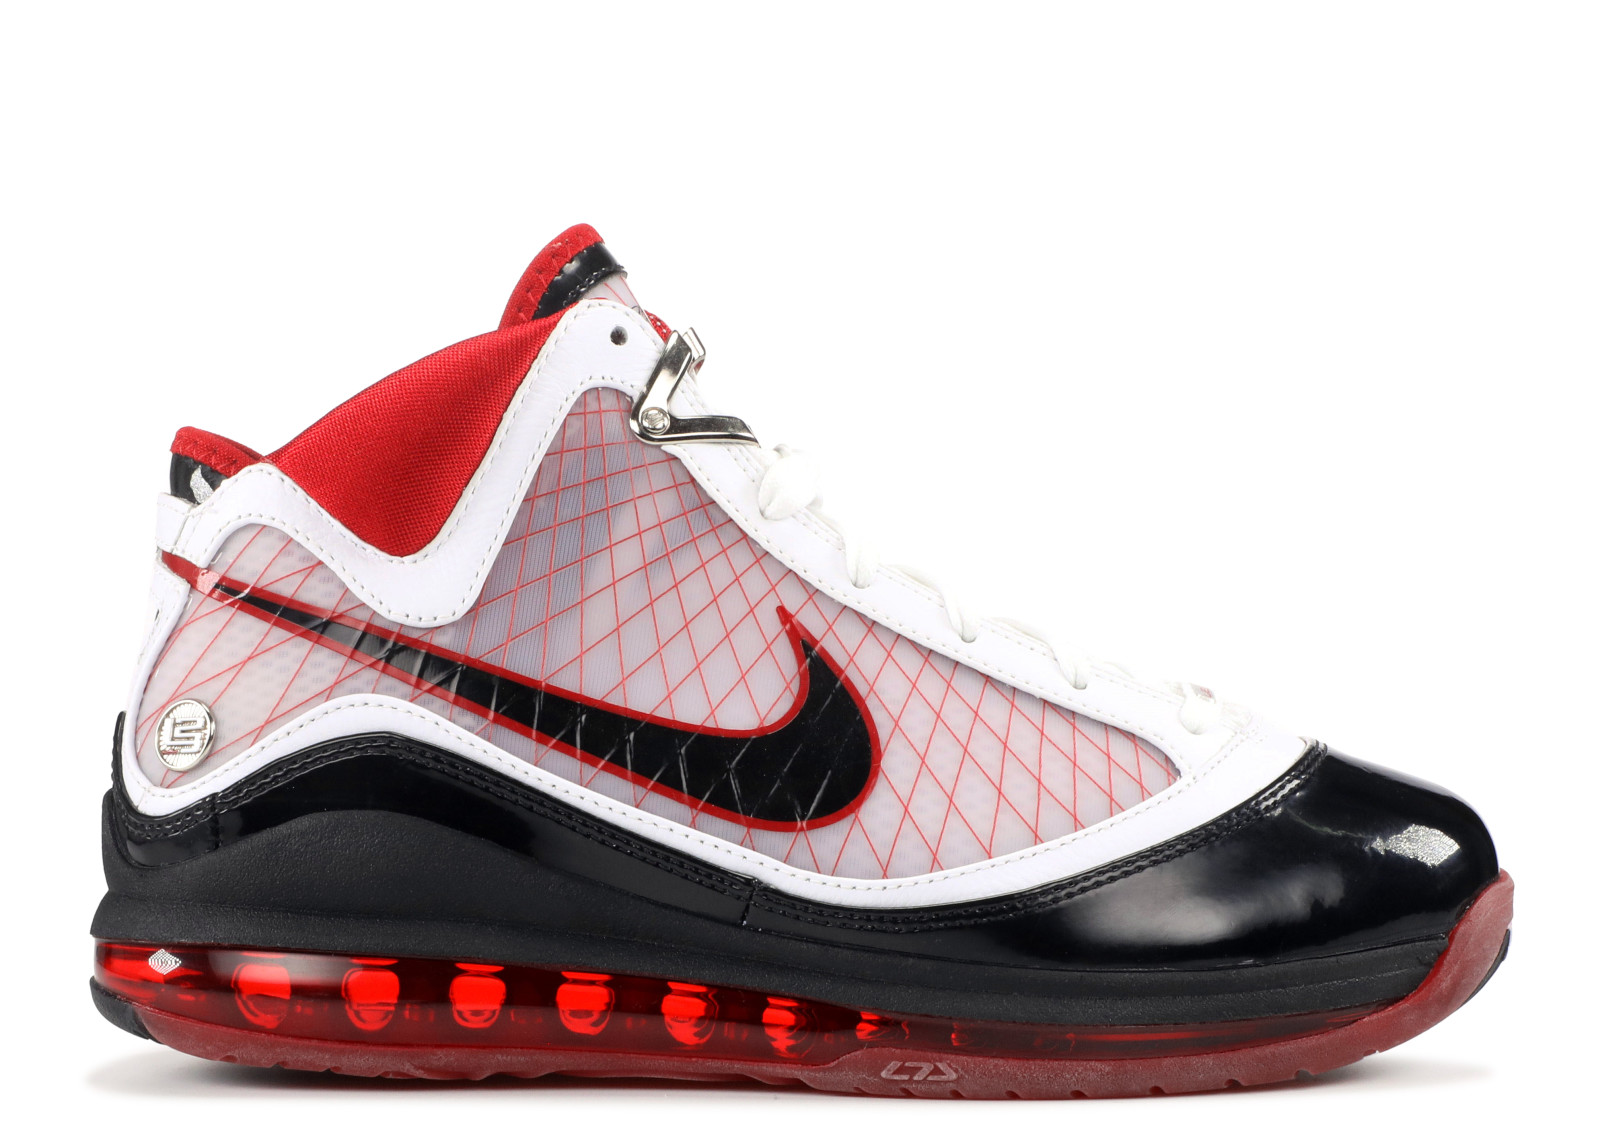 The Best LeBron James Shoes After 15 Years